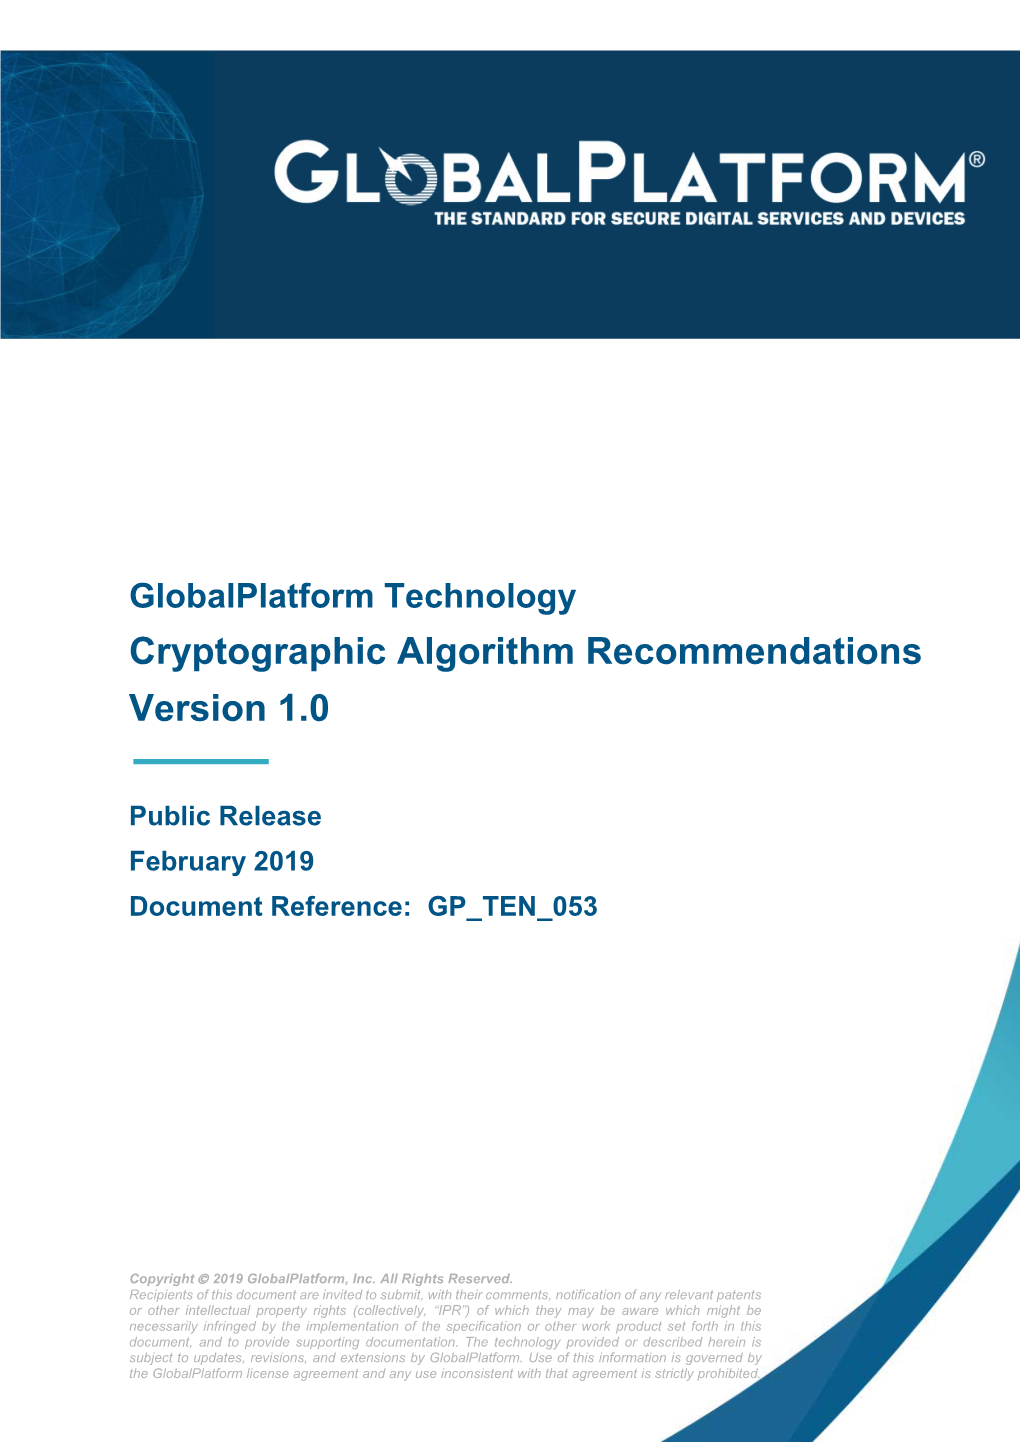 Cryptographic Algorithm Recommendations V1.0